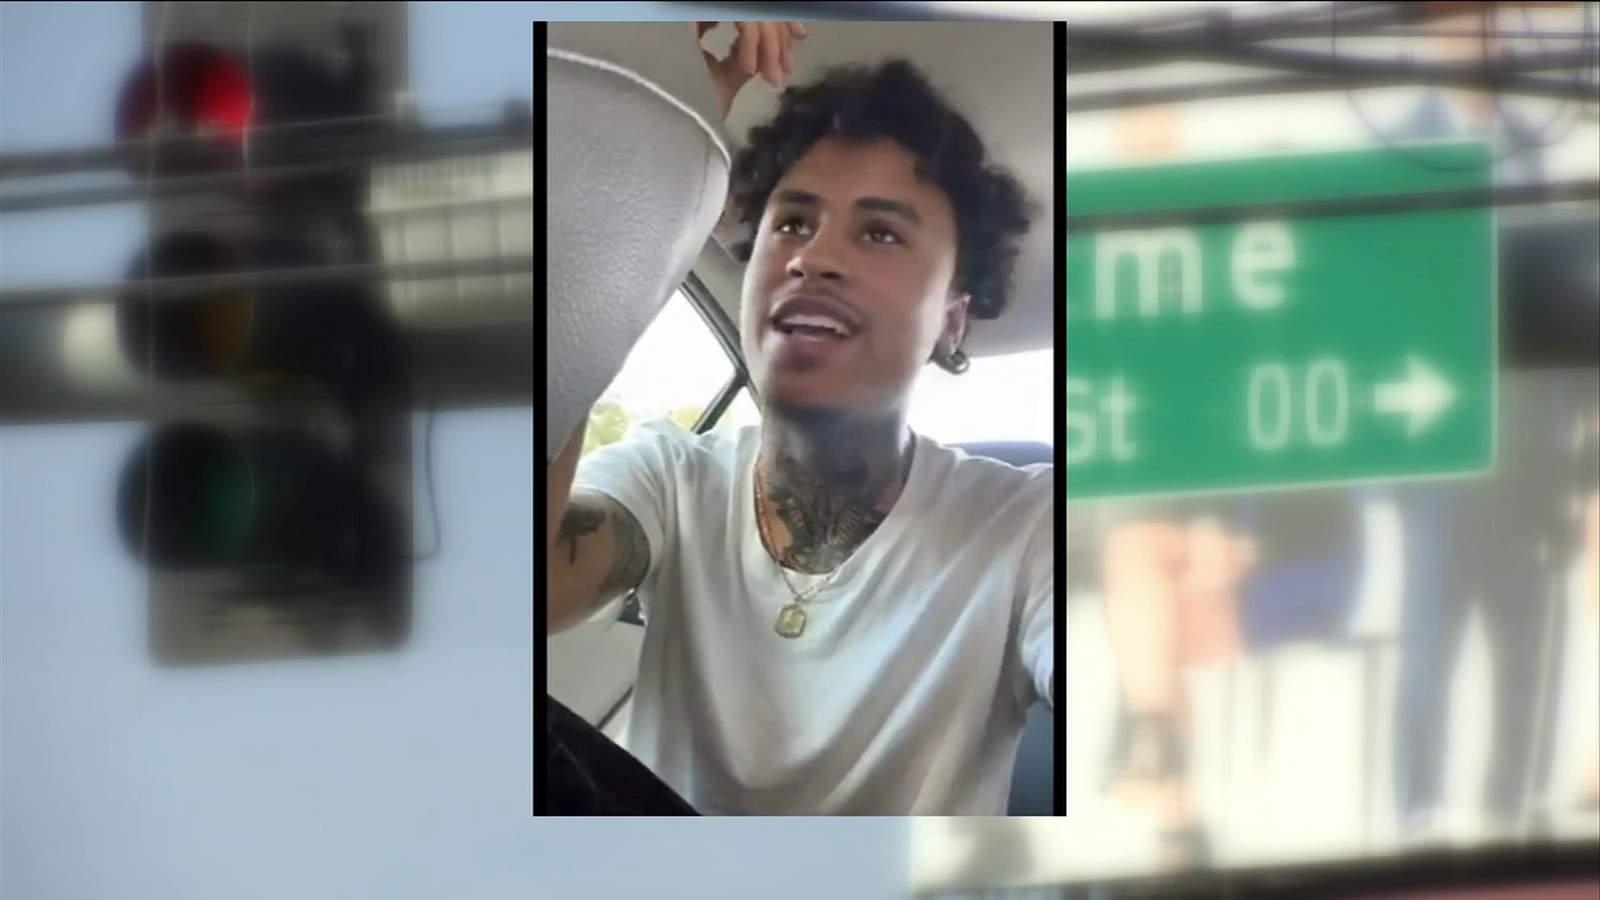 Man accused of abducting woman at gunpoint appears to Facebook Live as police search for him